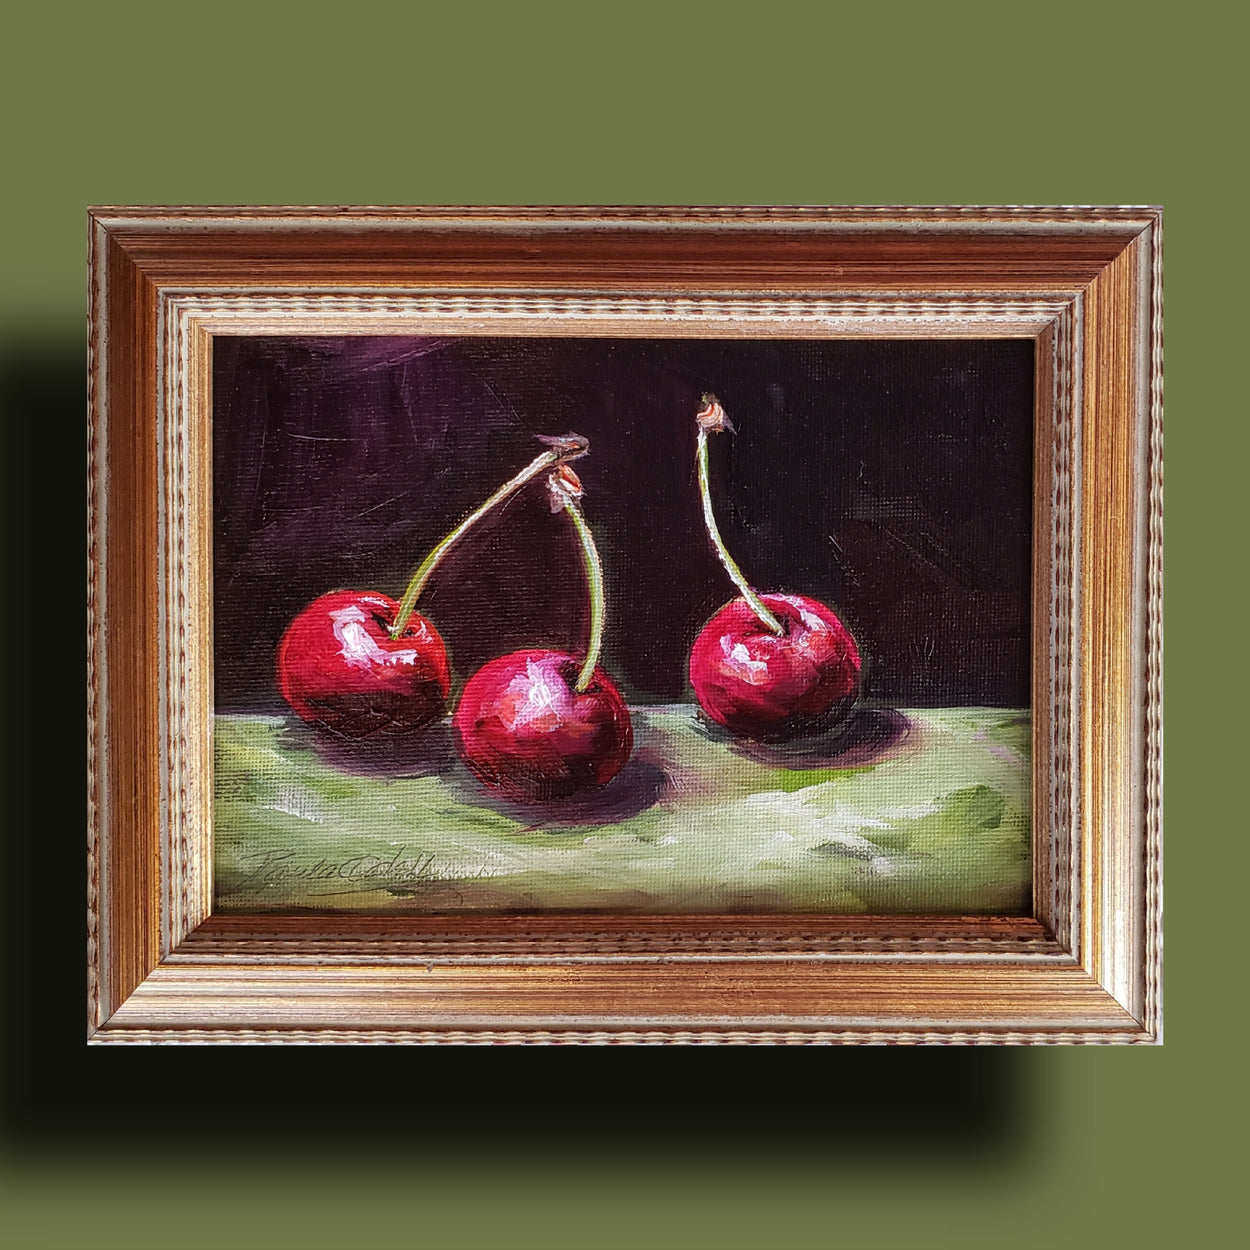 Ripe red cherries painted on a dark green and bright green background. Original oil painting ... 5x7.. comes in a beautiful gold frame